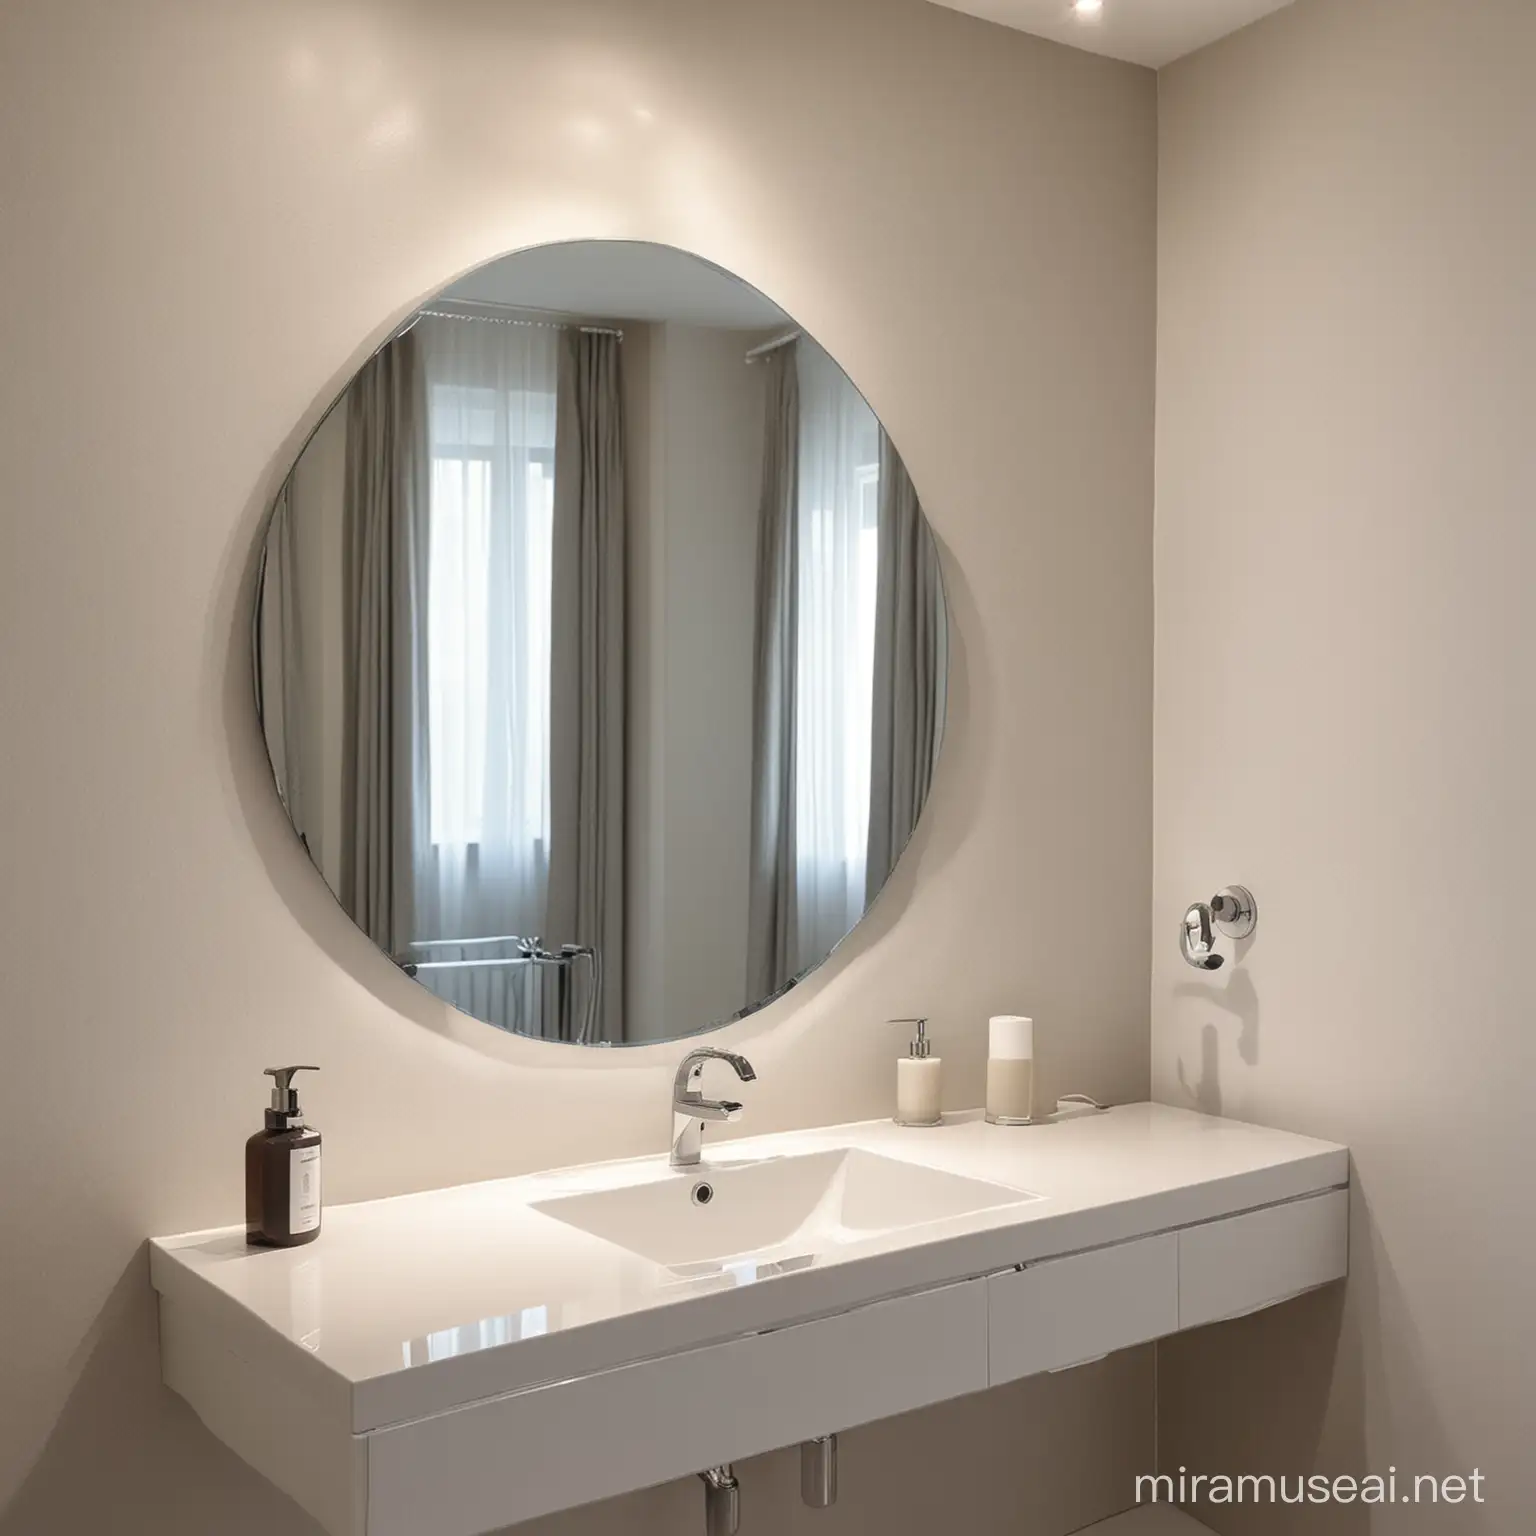 modern aesthetic curve. uneven shape of
 mirror in bathroom